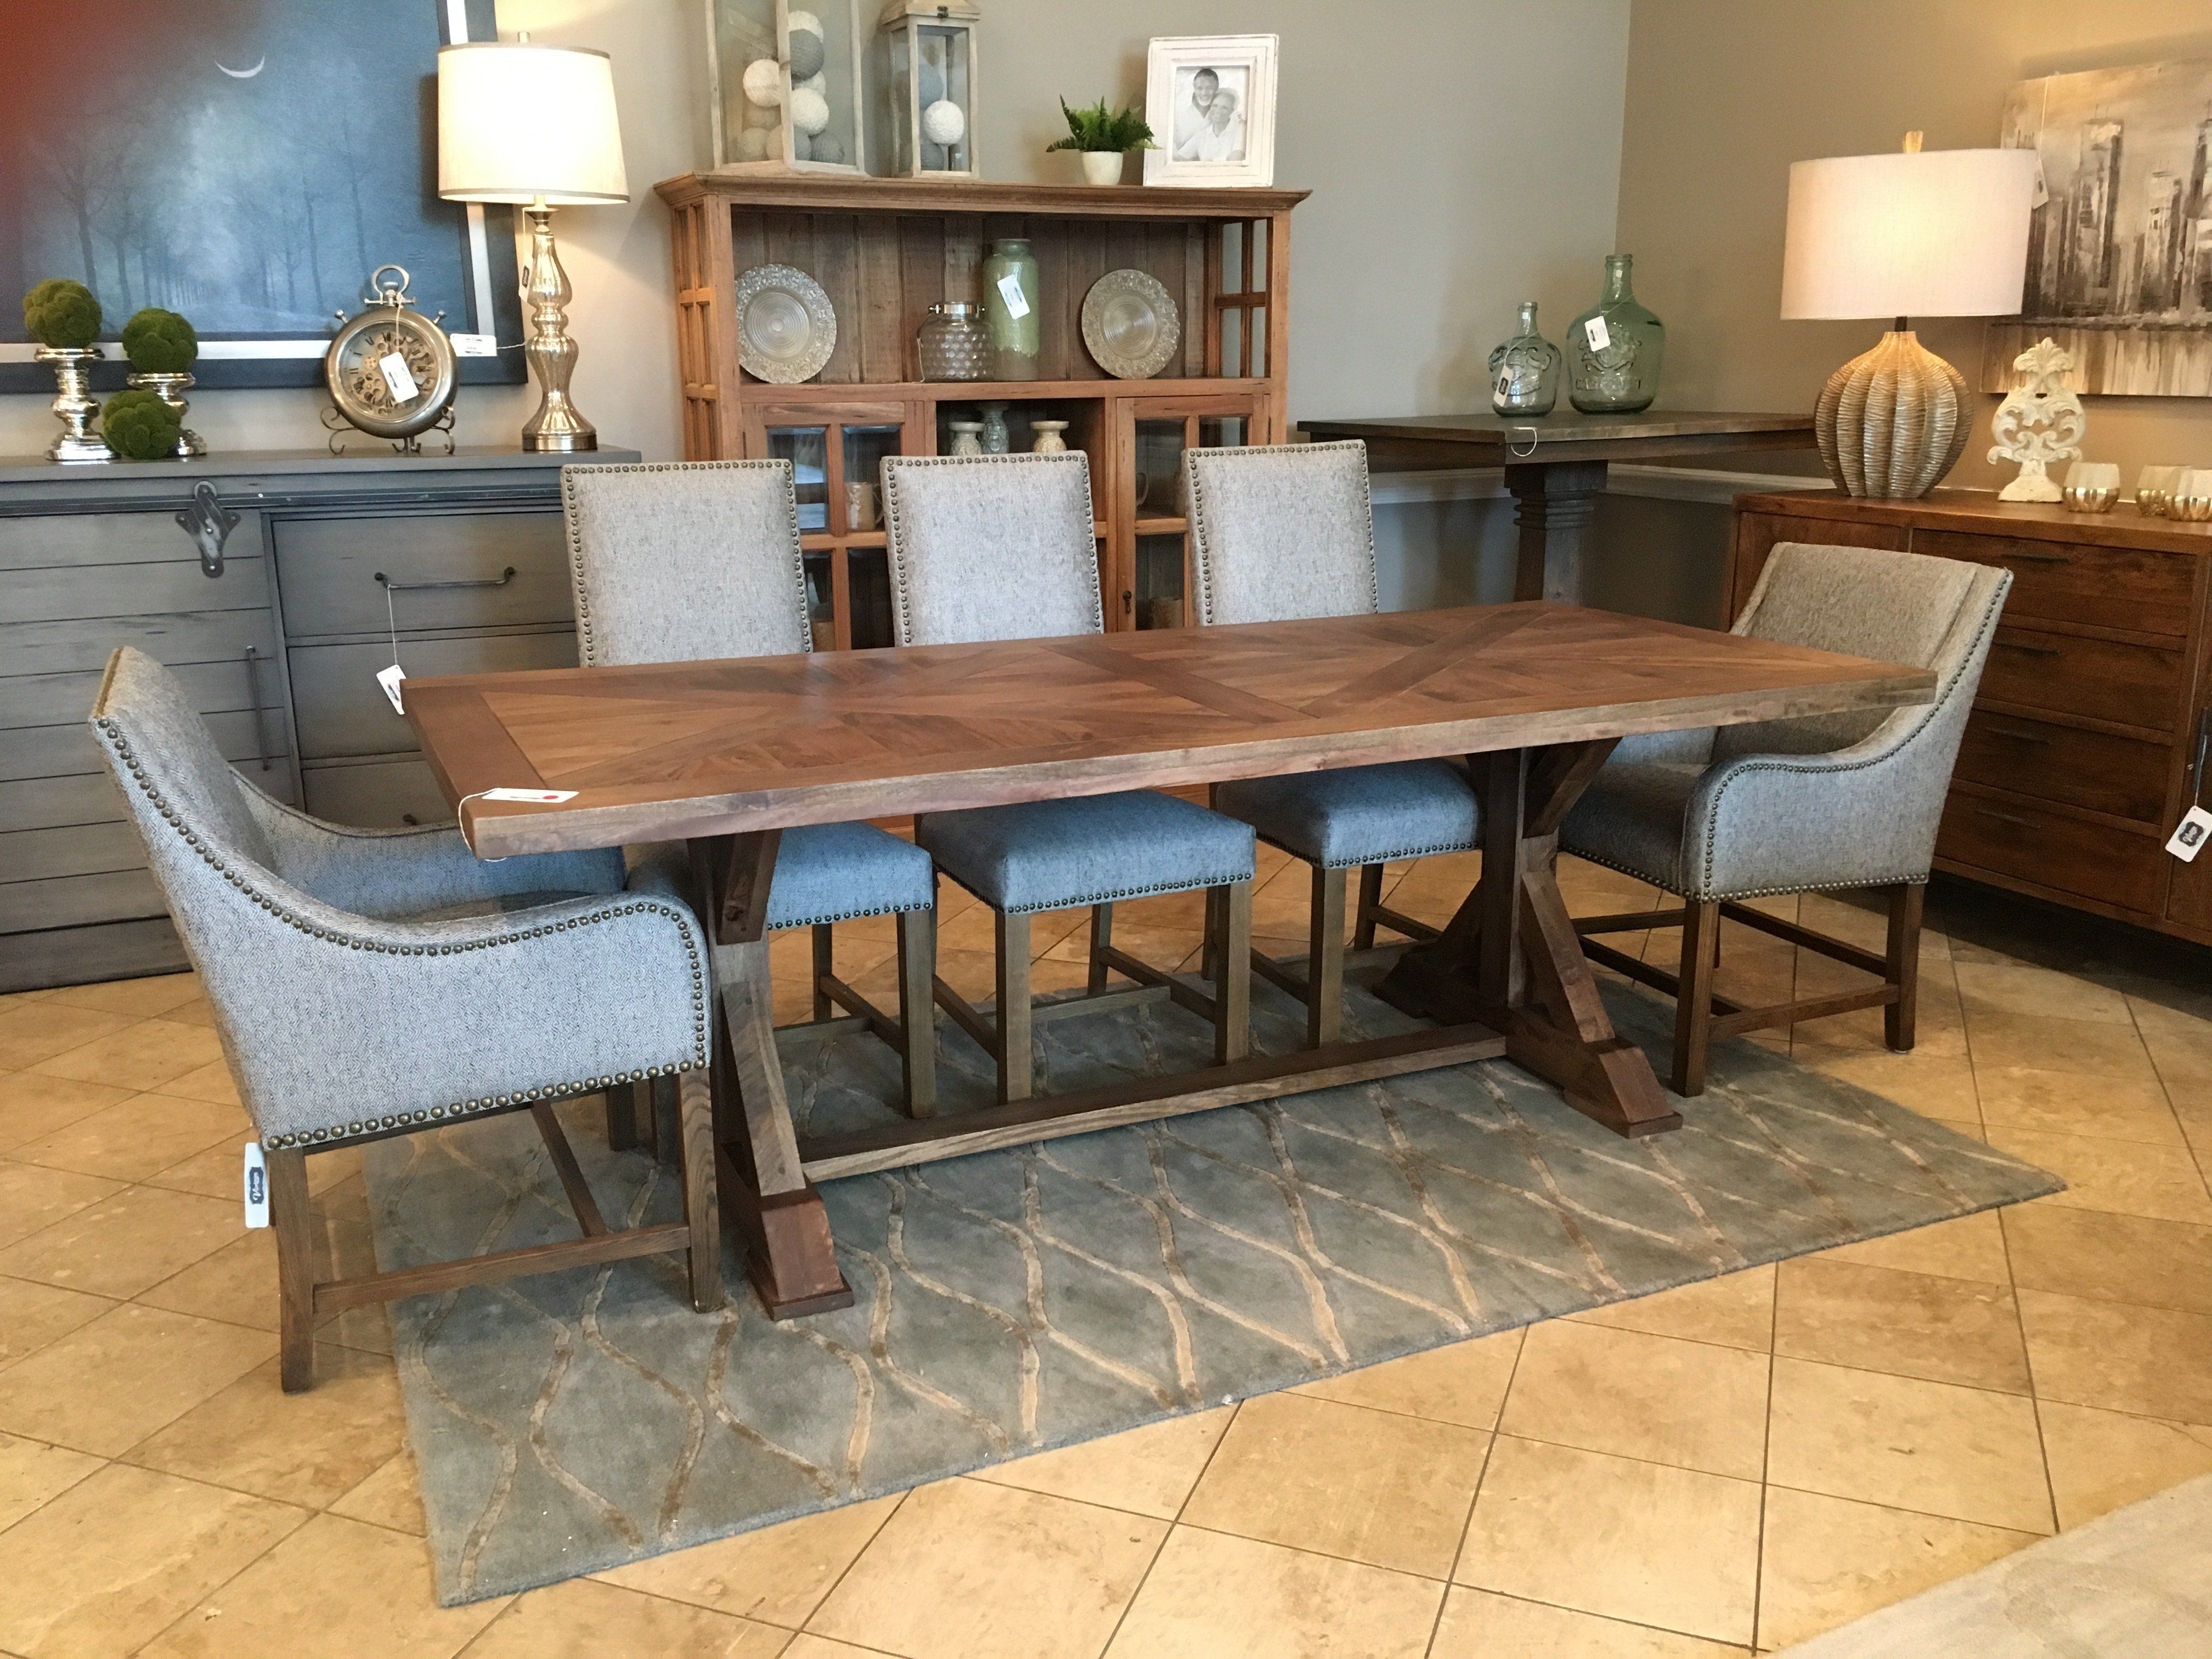 Magnolia Home Trestle Dining Table Inspirational Asheville 88 Regarding Most Recent Magnolia Home Sawbuck Dining Tables (View 16 of 20)